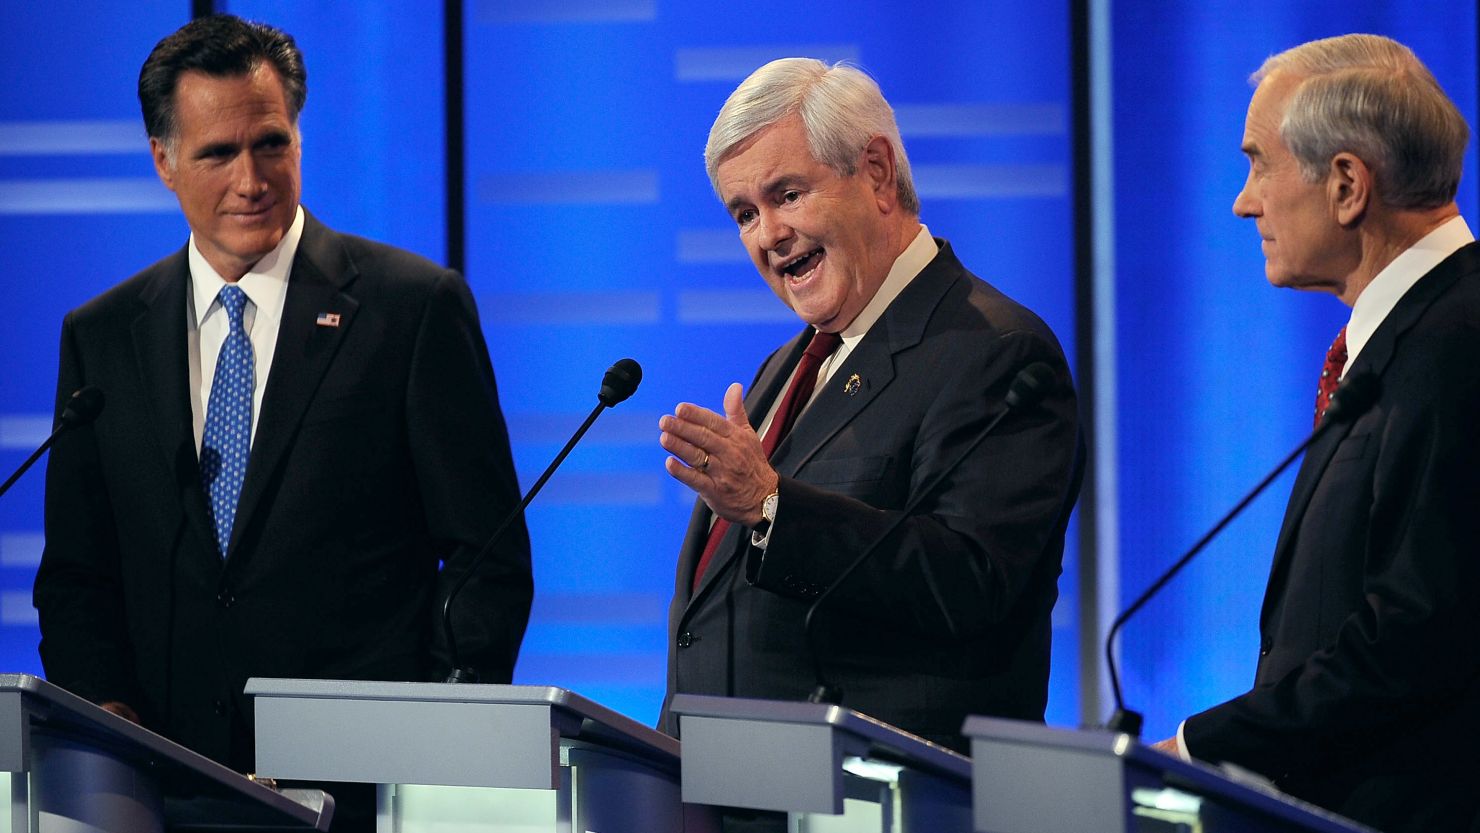 Republican voters haven't enthusiastically backed any of the top candidates, including Mitt Romney, Newt Gingrich and Ron Paul.